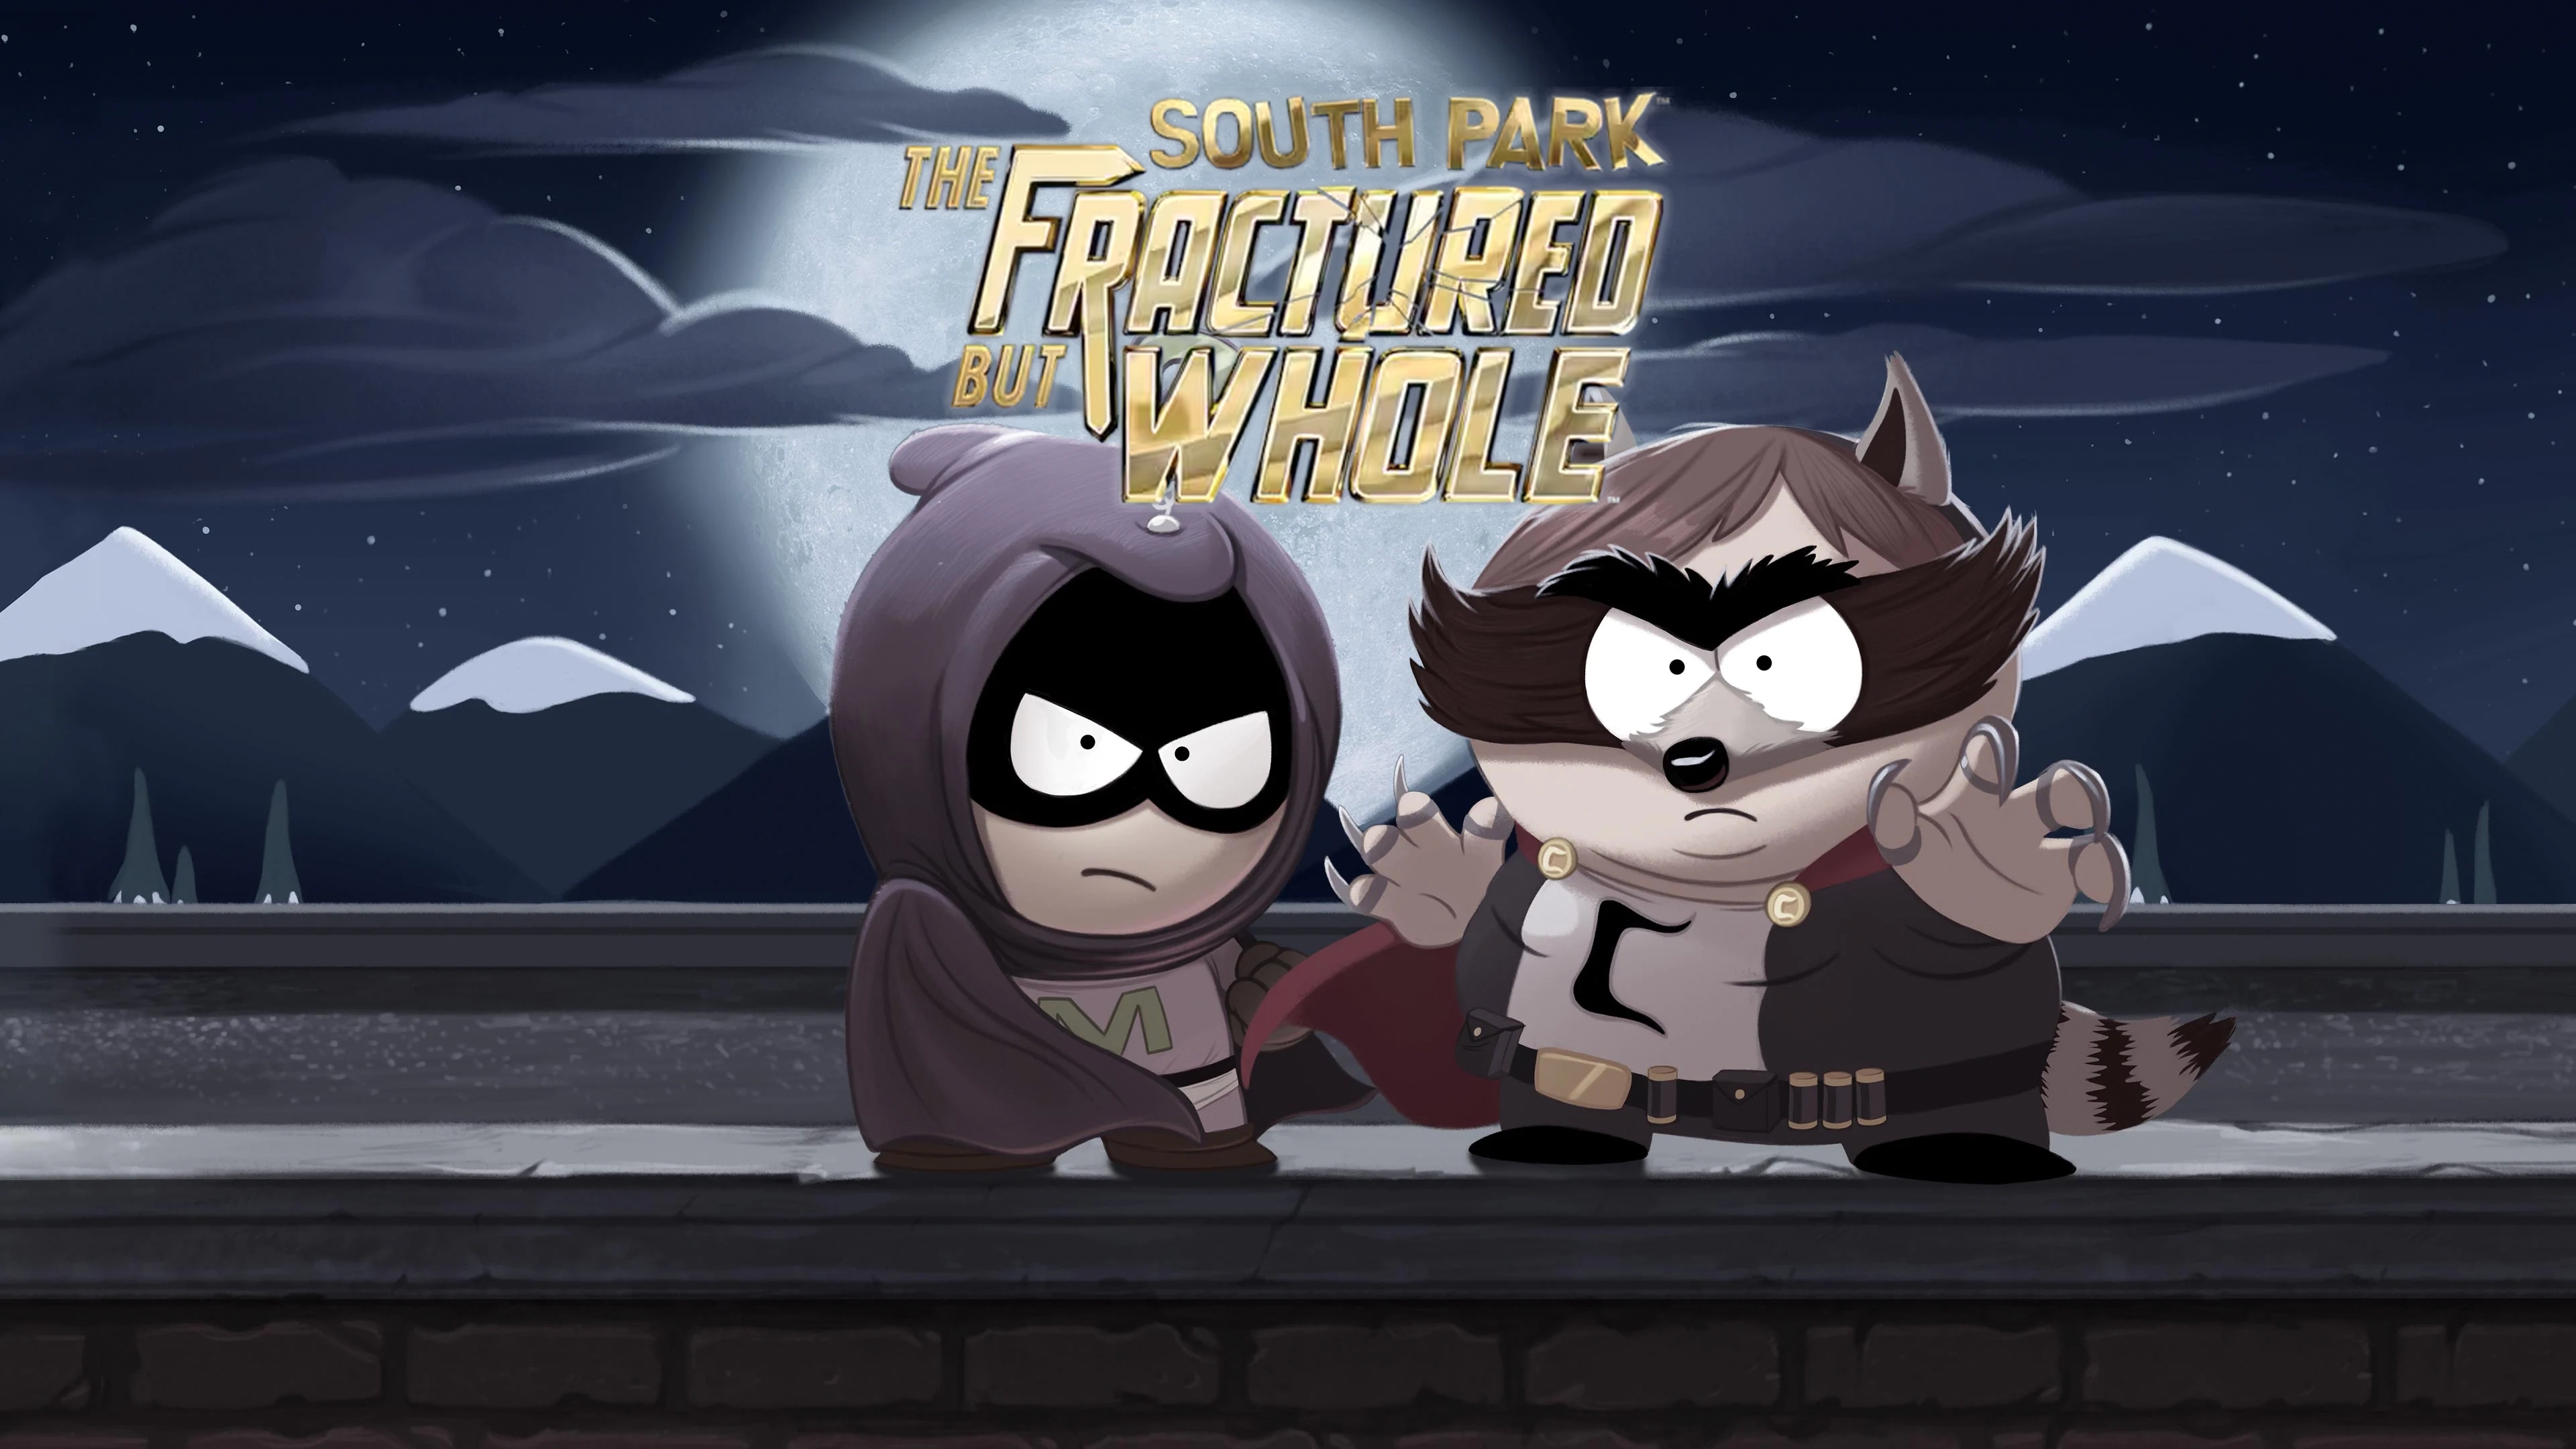 South park the fractured but whole купить ключ steam дешево фото 17